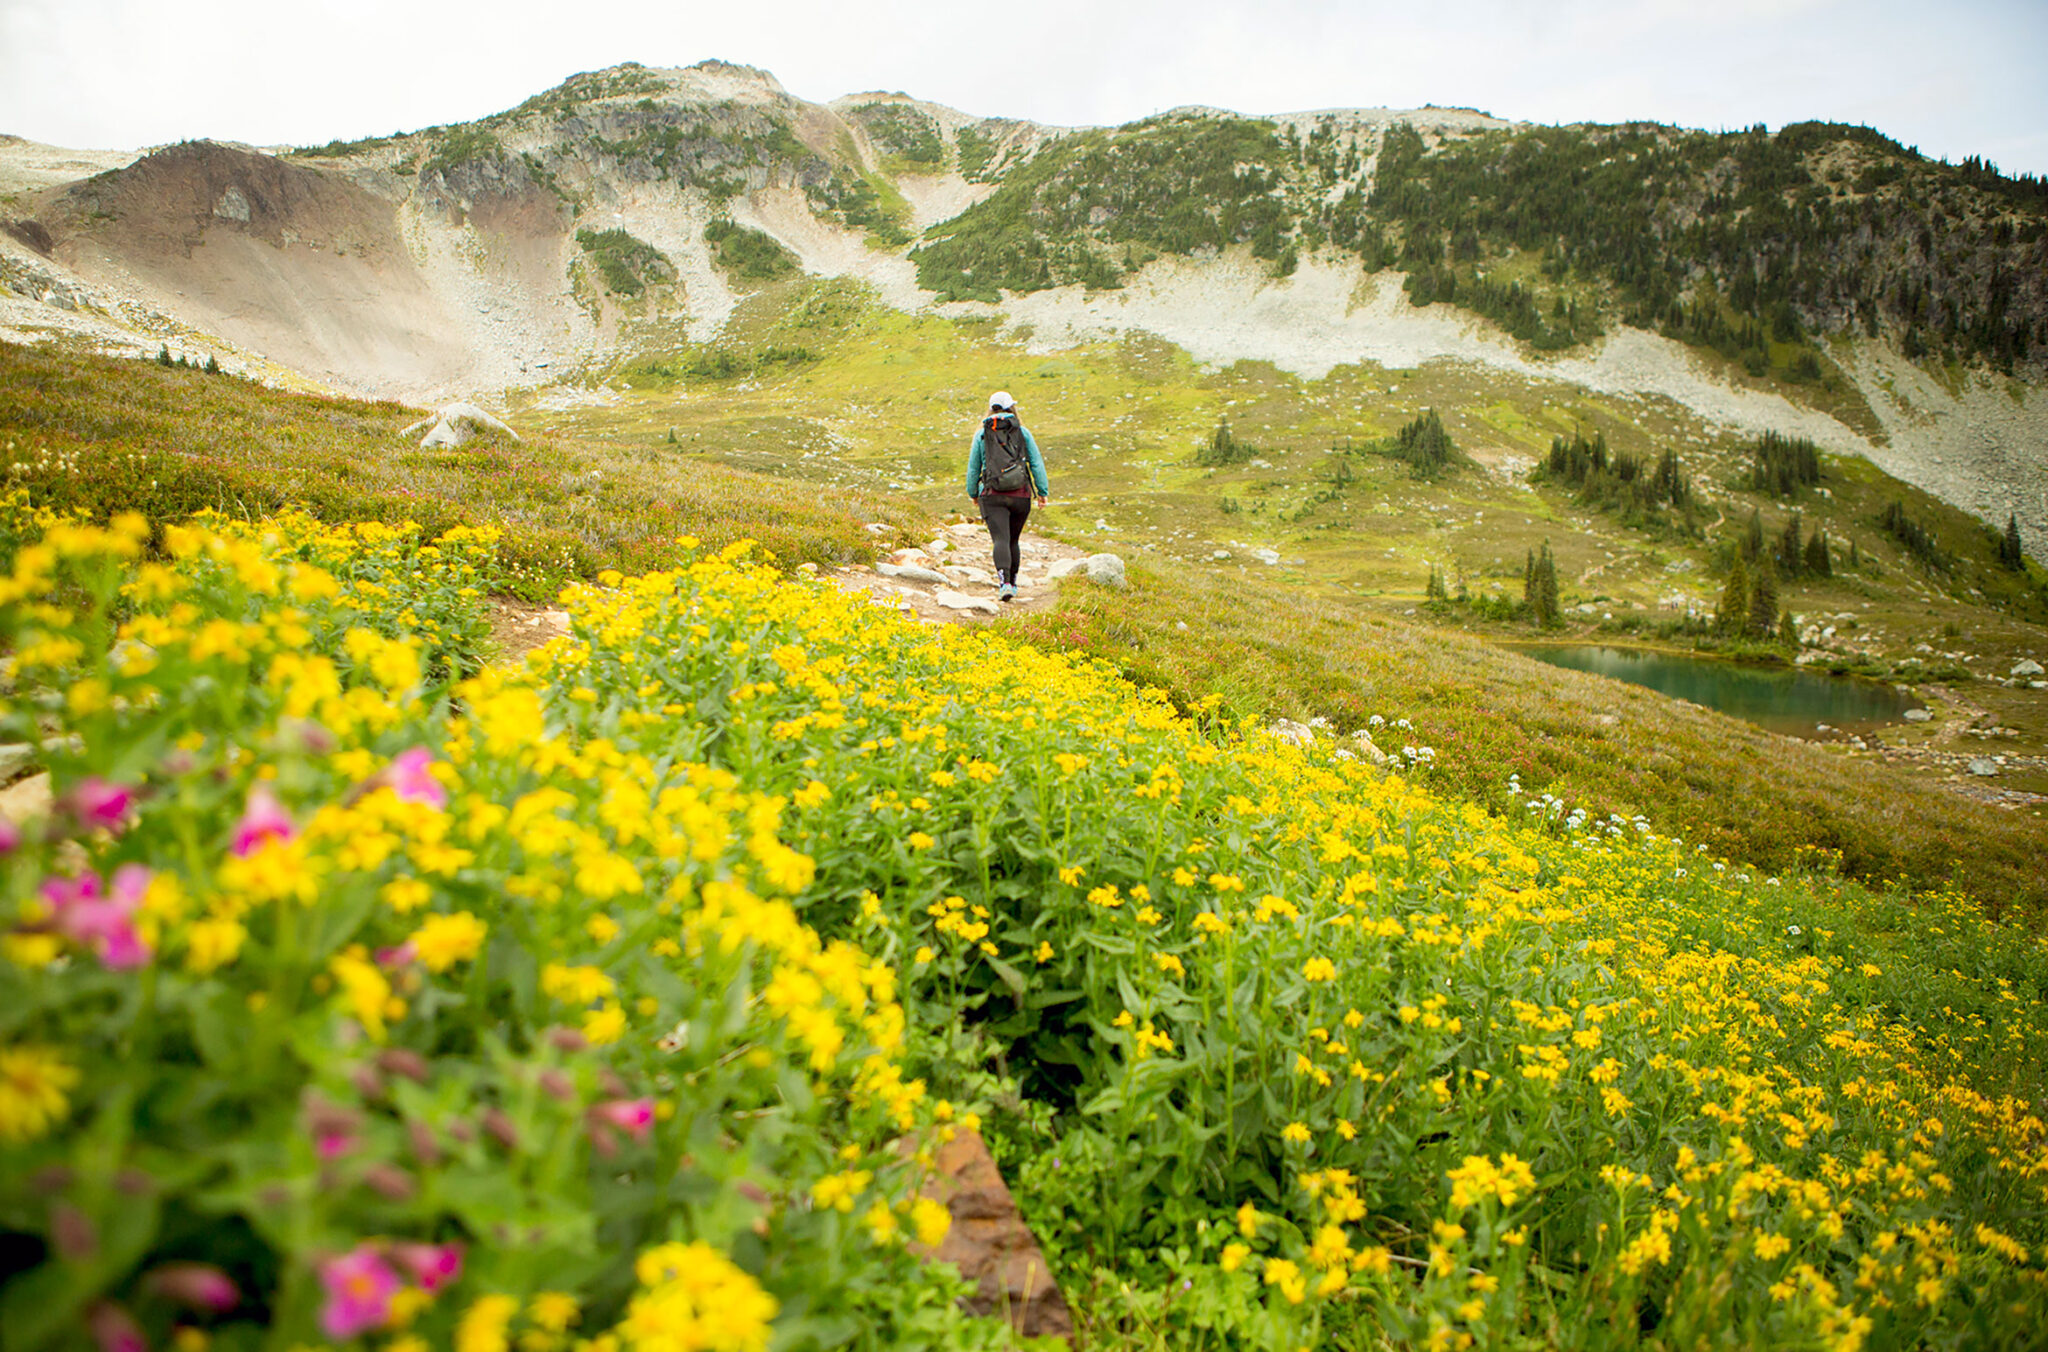 A hiker makes their way through a alpine meadow filled with wildflowers on Whistler Mountain.